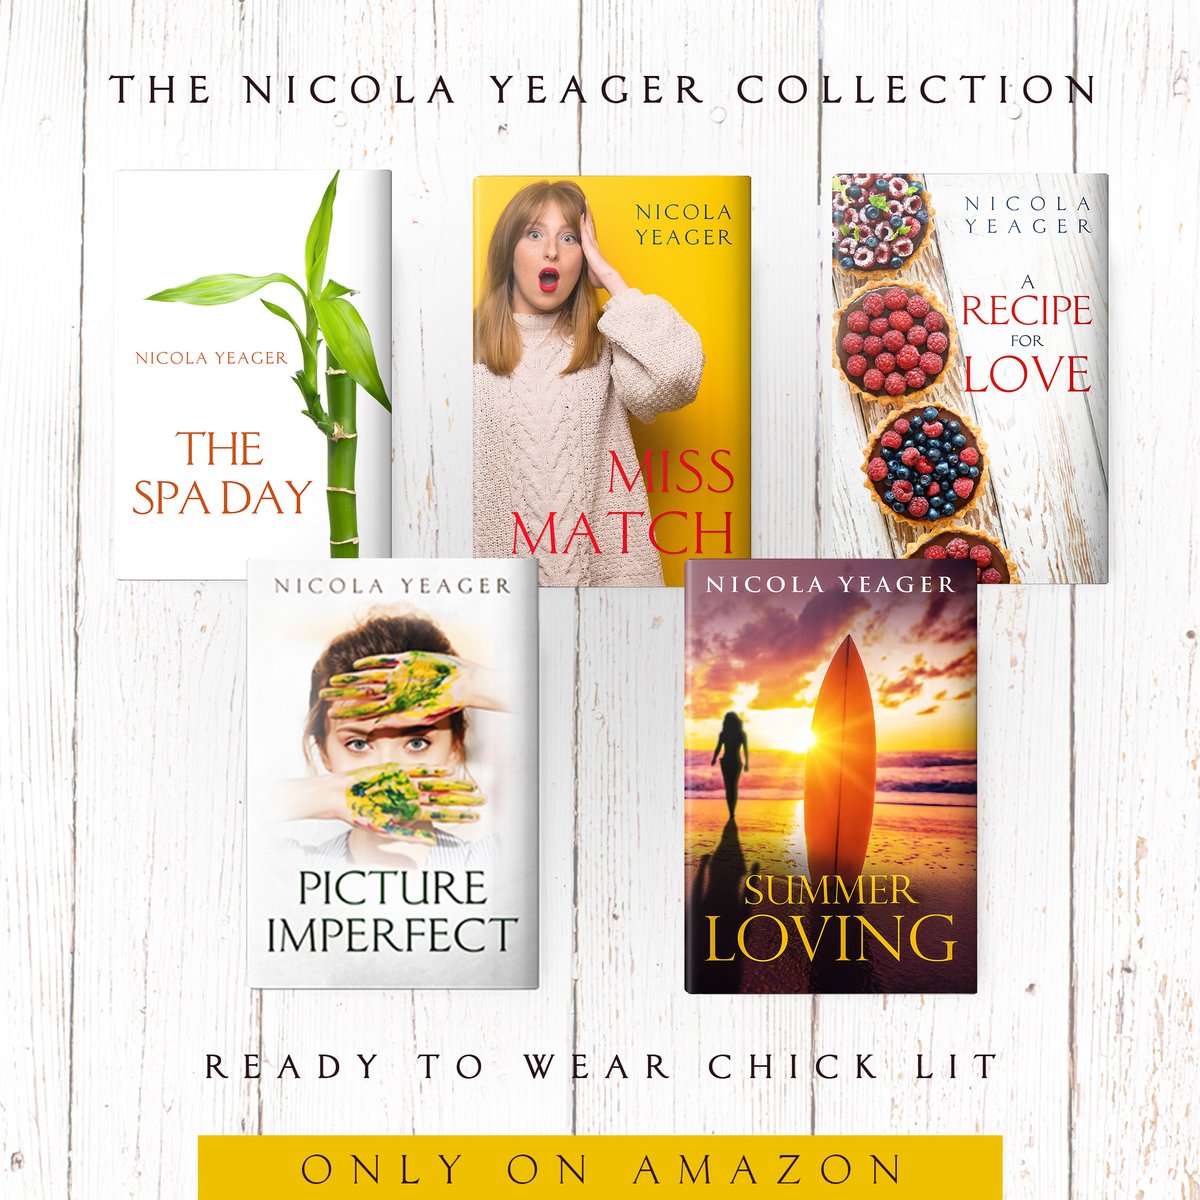 'You will be wasting your money if you buy any of Nicola's awful books. She has been married for six years and I wasn't invited to the wedding or honeymoon and she still hasn't introduced me to her husband or children.' - Mrs C. Yeager, author's mother. viewAuthor.at/NicolaYeager